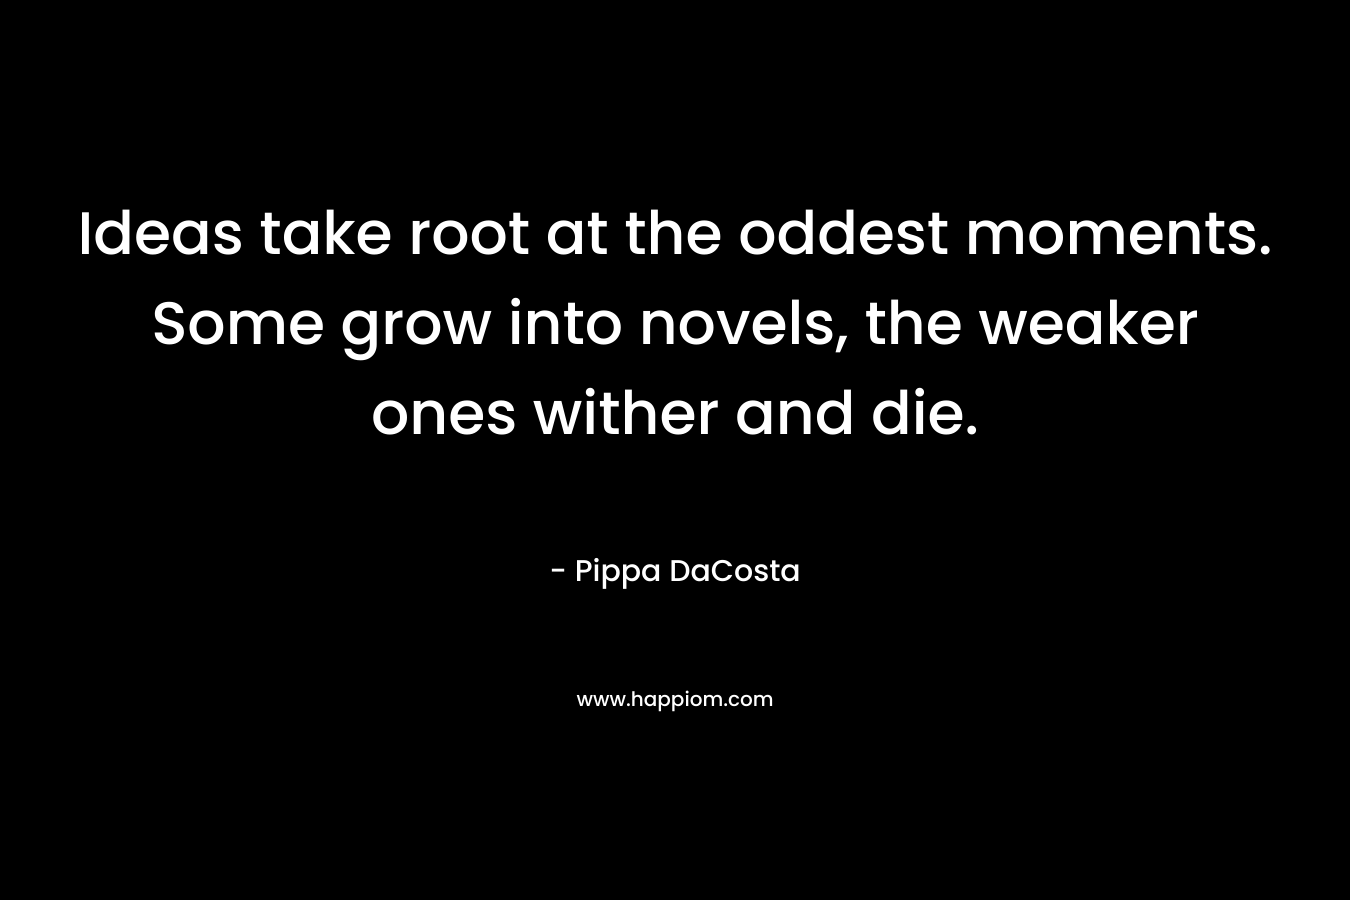 Ideas take root at the oddest moments. Some grow into novels, the weaker ones wither and die. – Pippa DaCosta